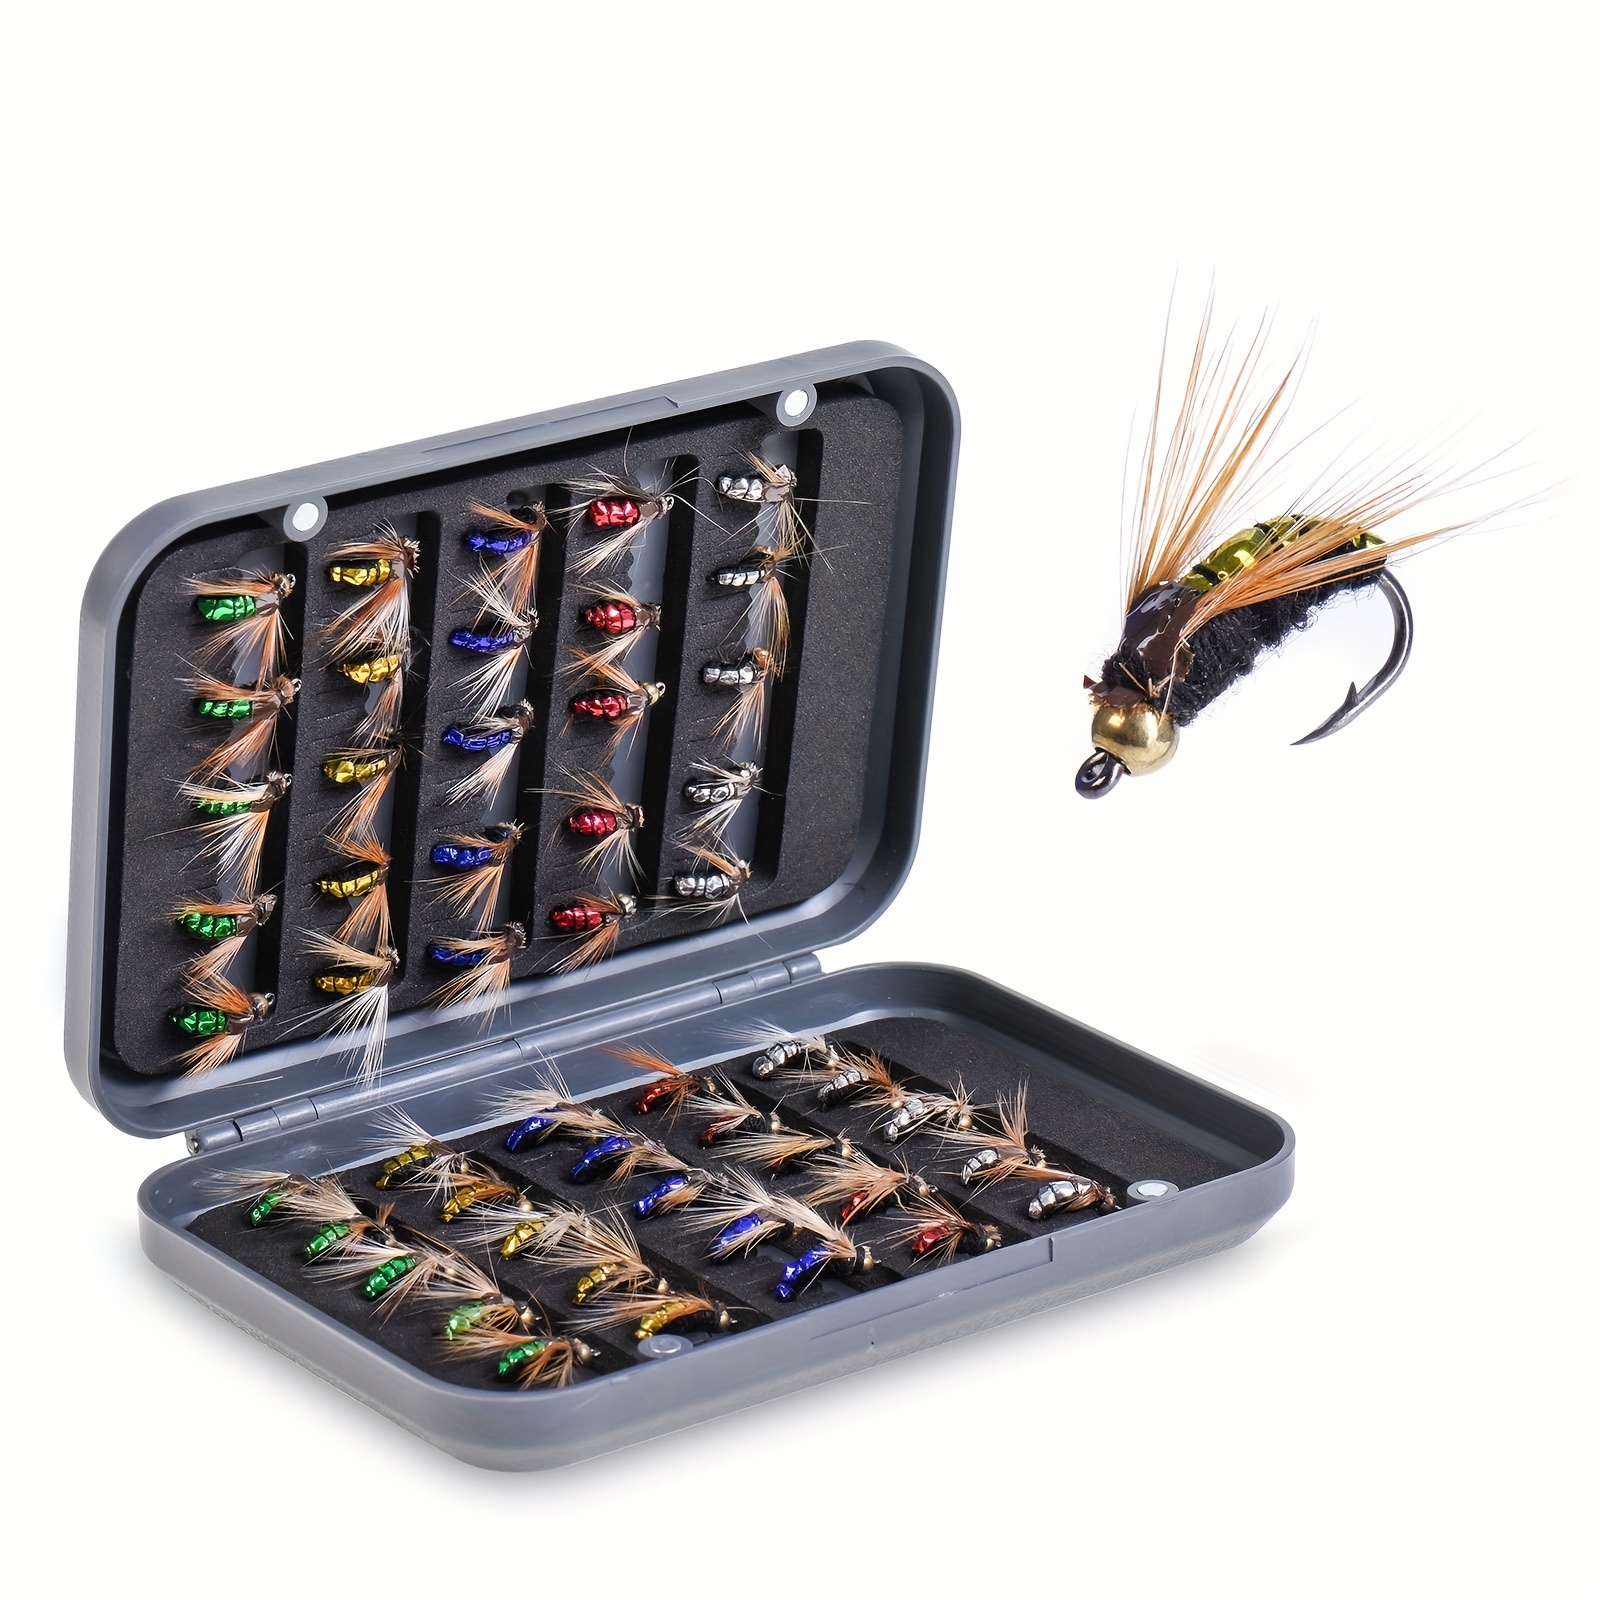 Premium Fly Fishing Flies Kit - 50 Hand-Tied Flies with Waterproof Fly Box  - Perfect for Trout, Bass, and Salmon Fishing